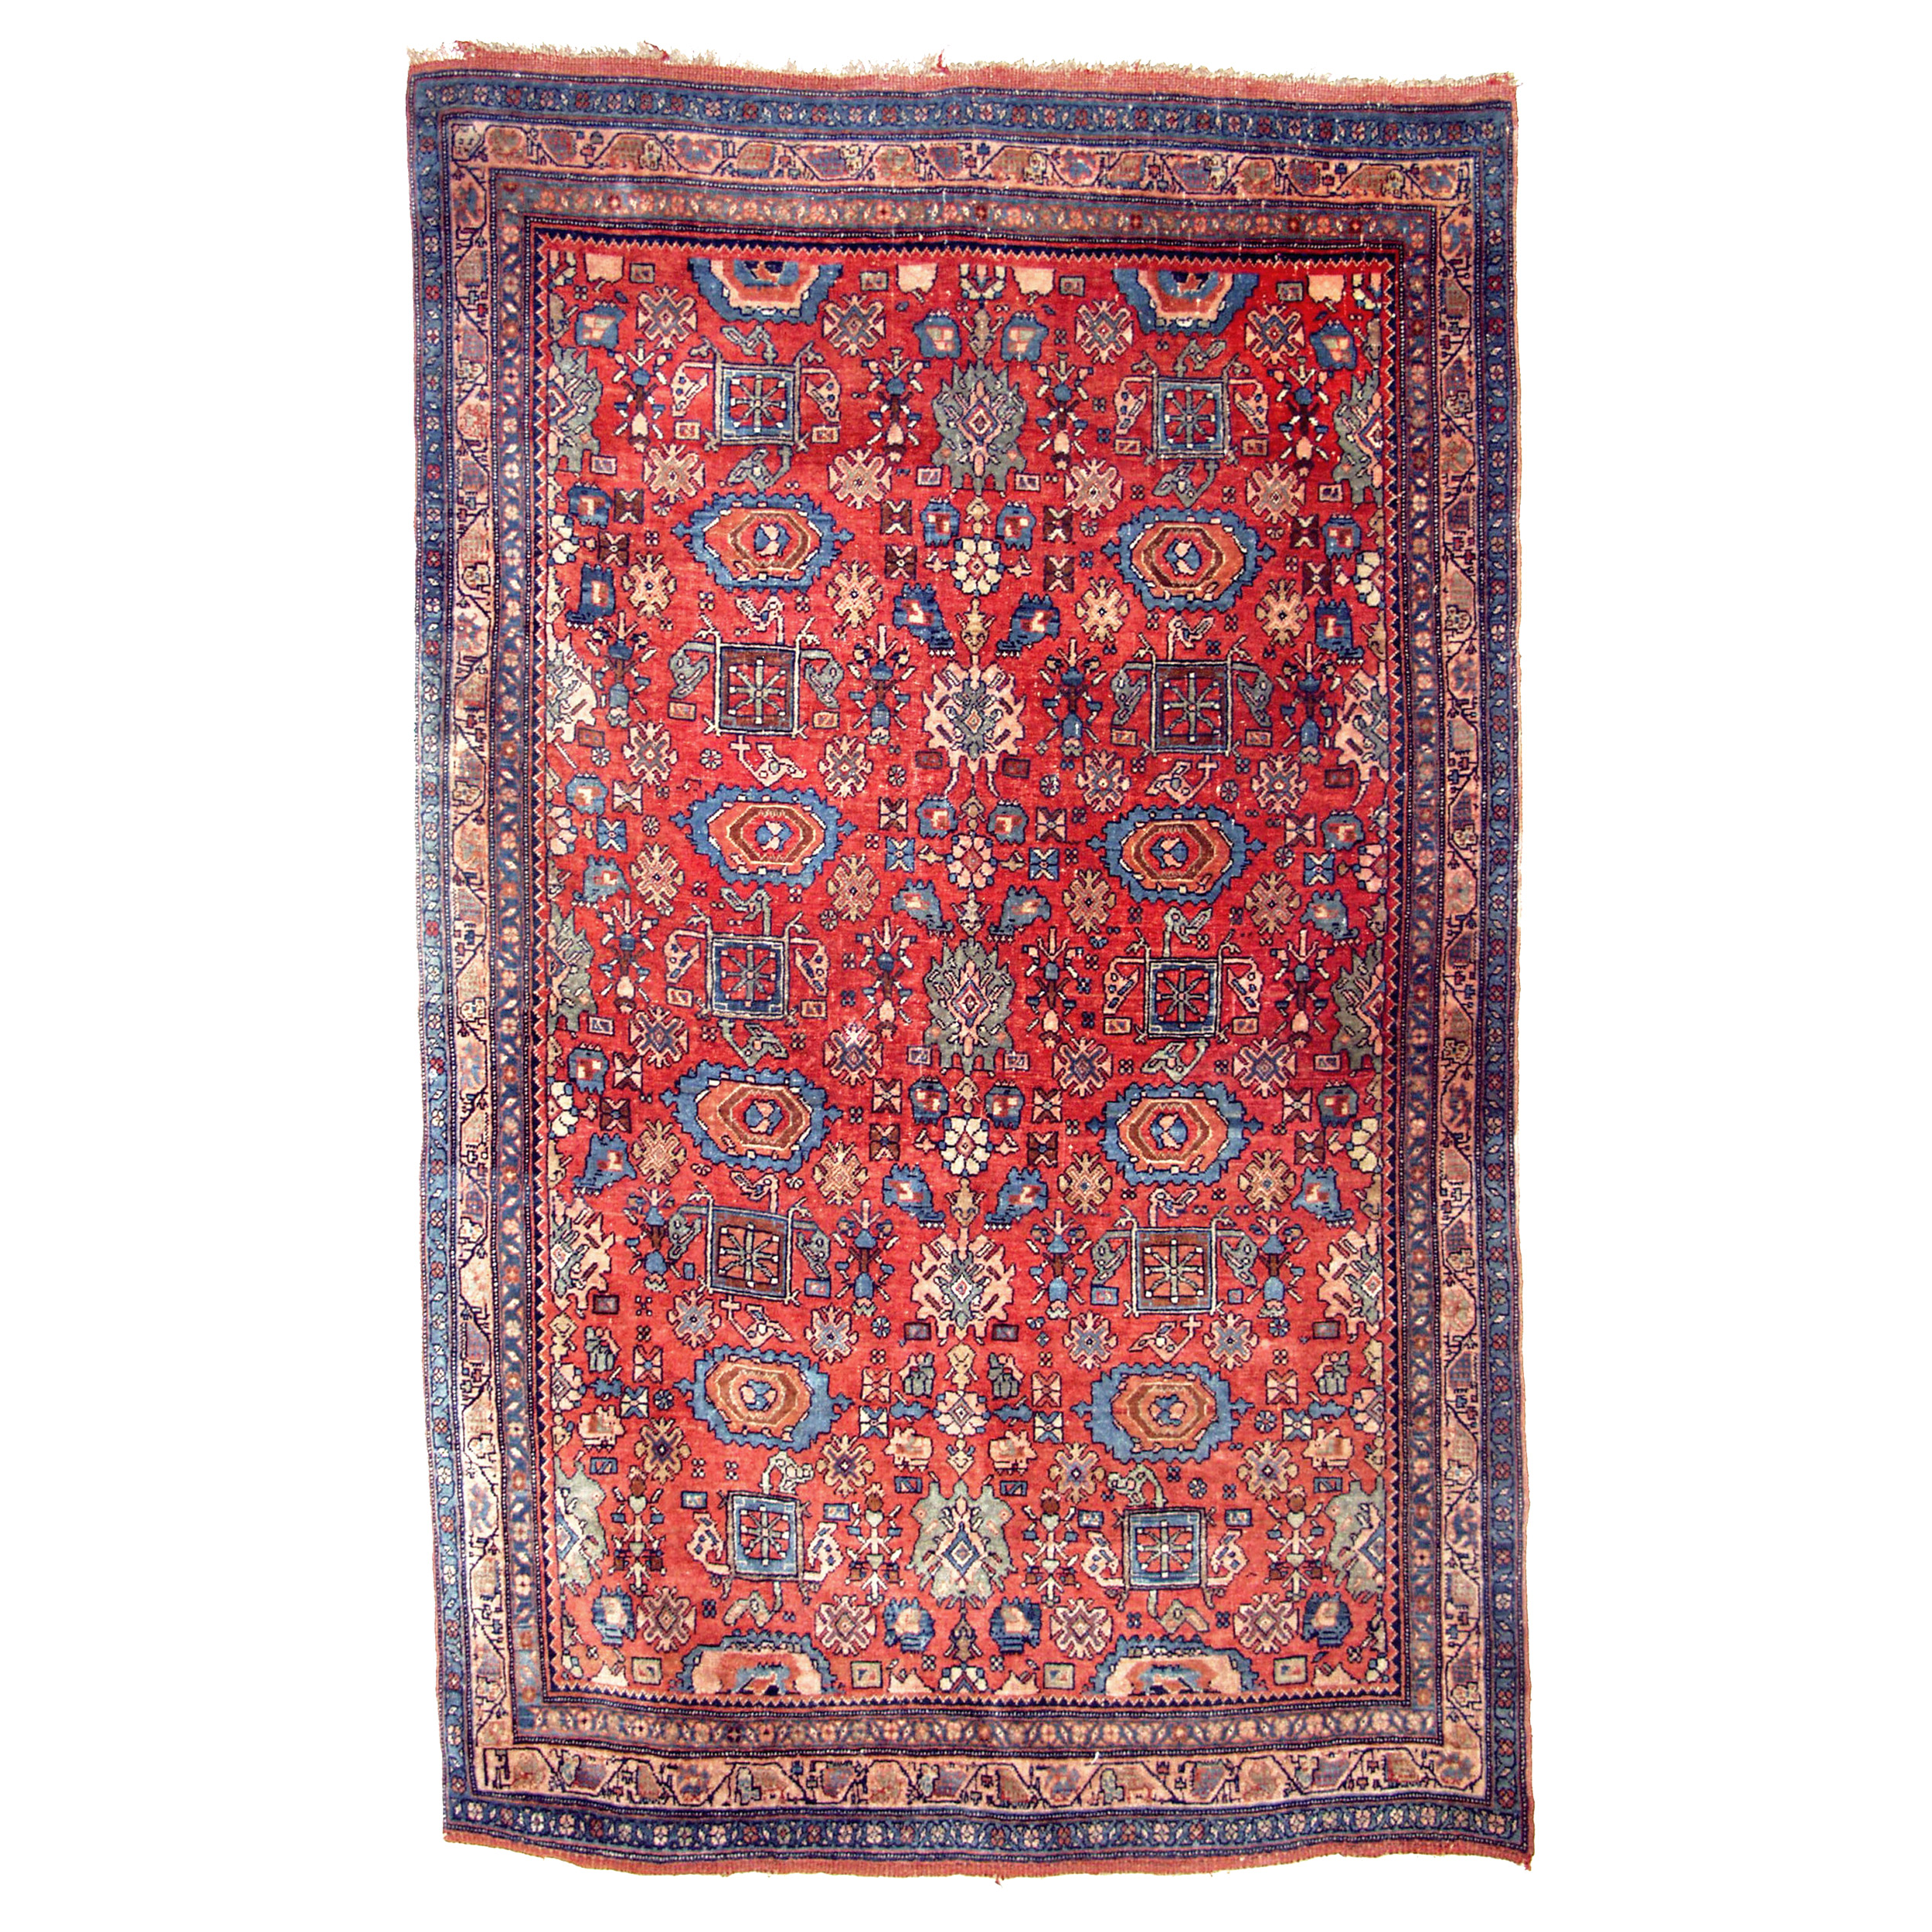 Antique Persian Bidjar rug with the classic Harshang design on a brick color field, circa 1895. Douglas Stock Gallery Antique Oriental Rug Research Archives. antique rugs Boston,MA area